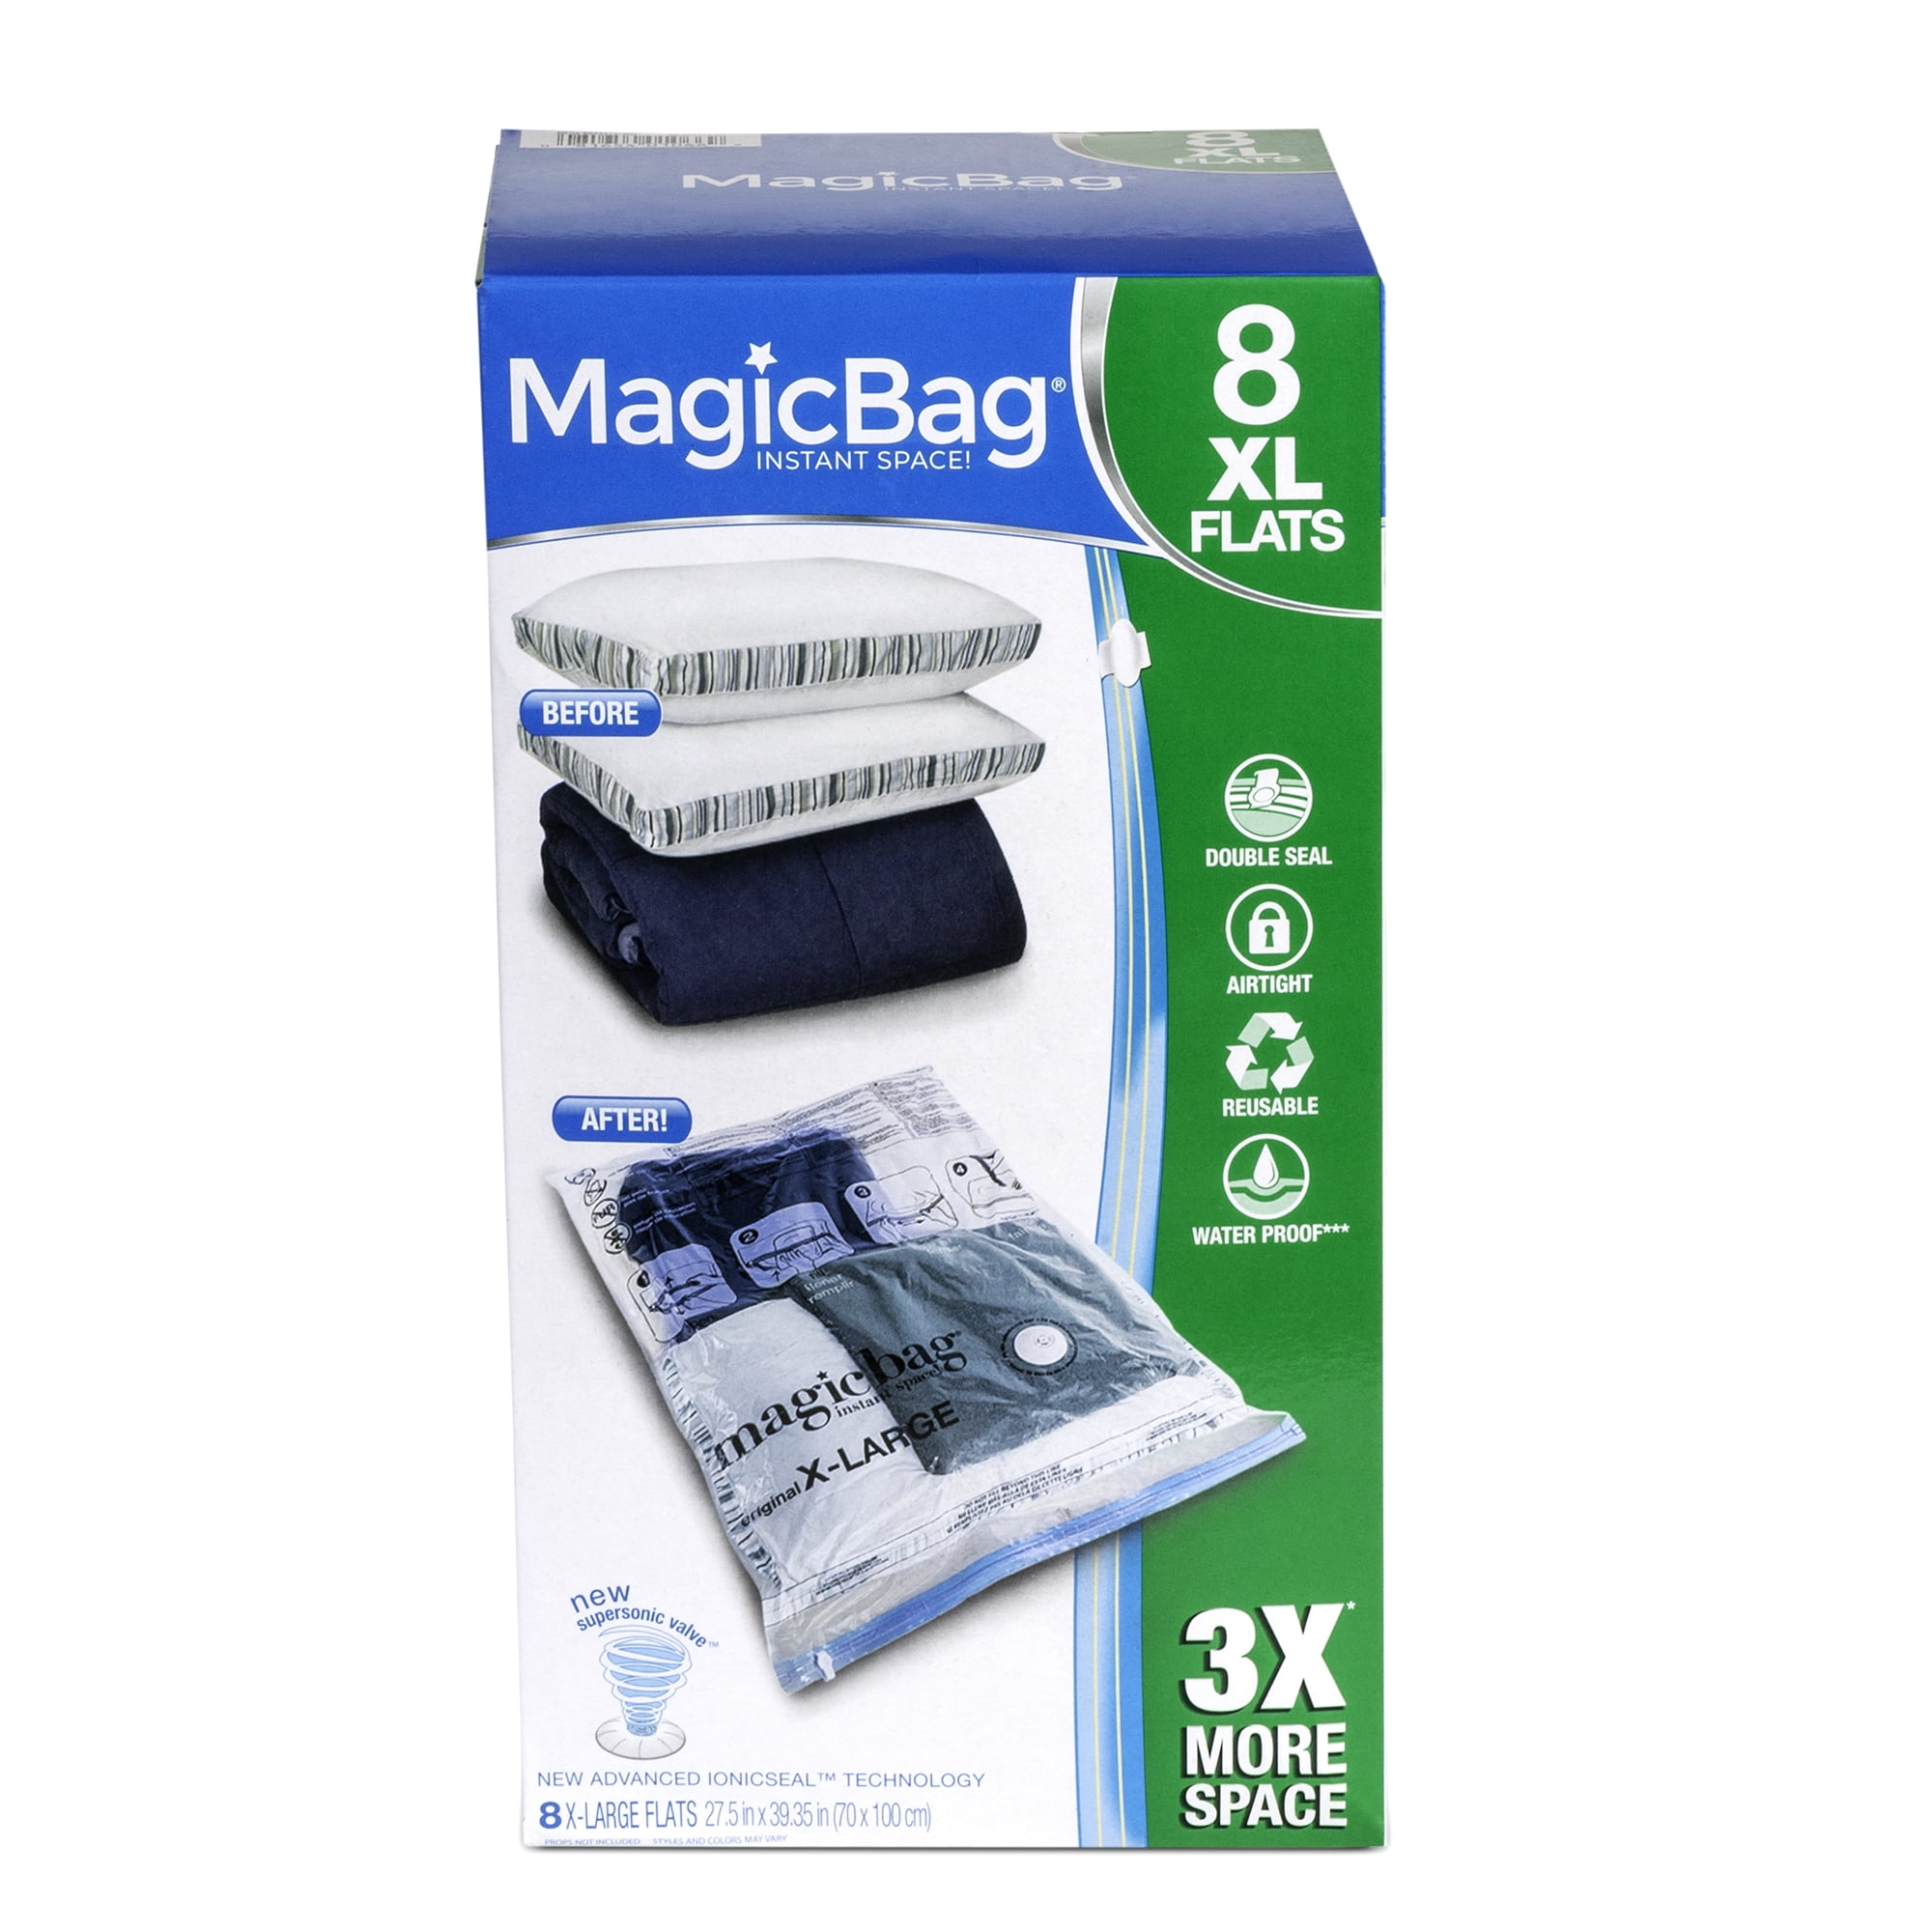 BoxLegend Space Saver Bags, 8-Pack